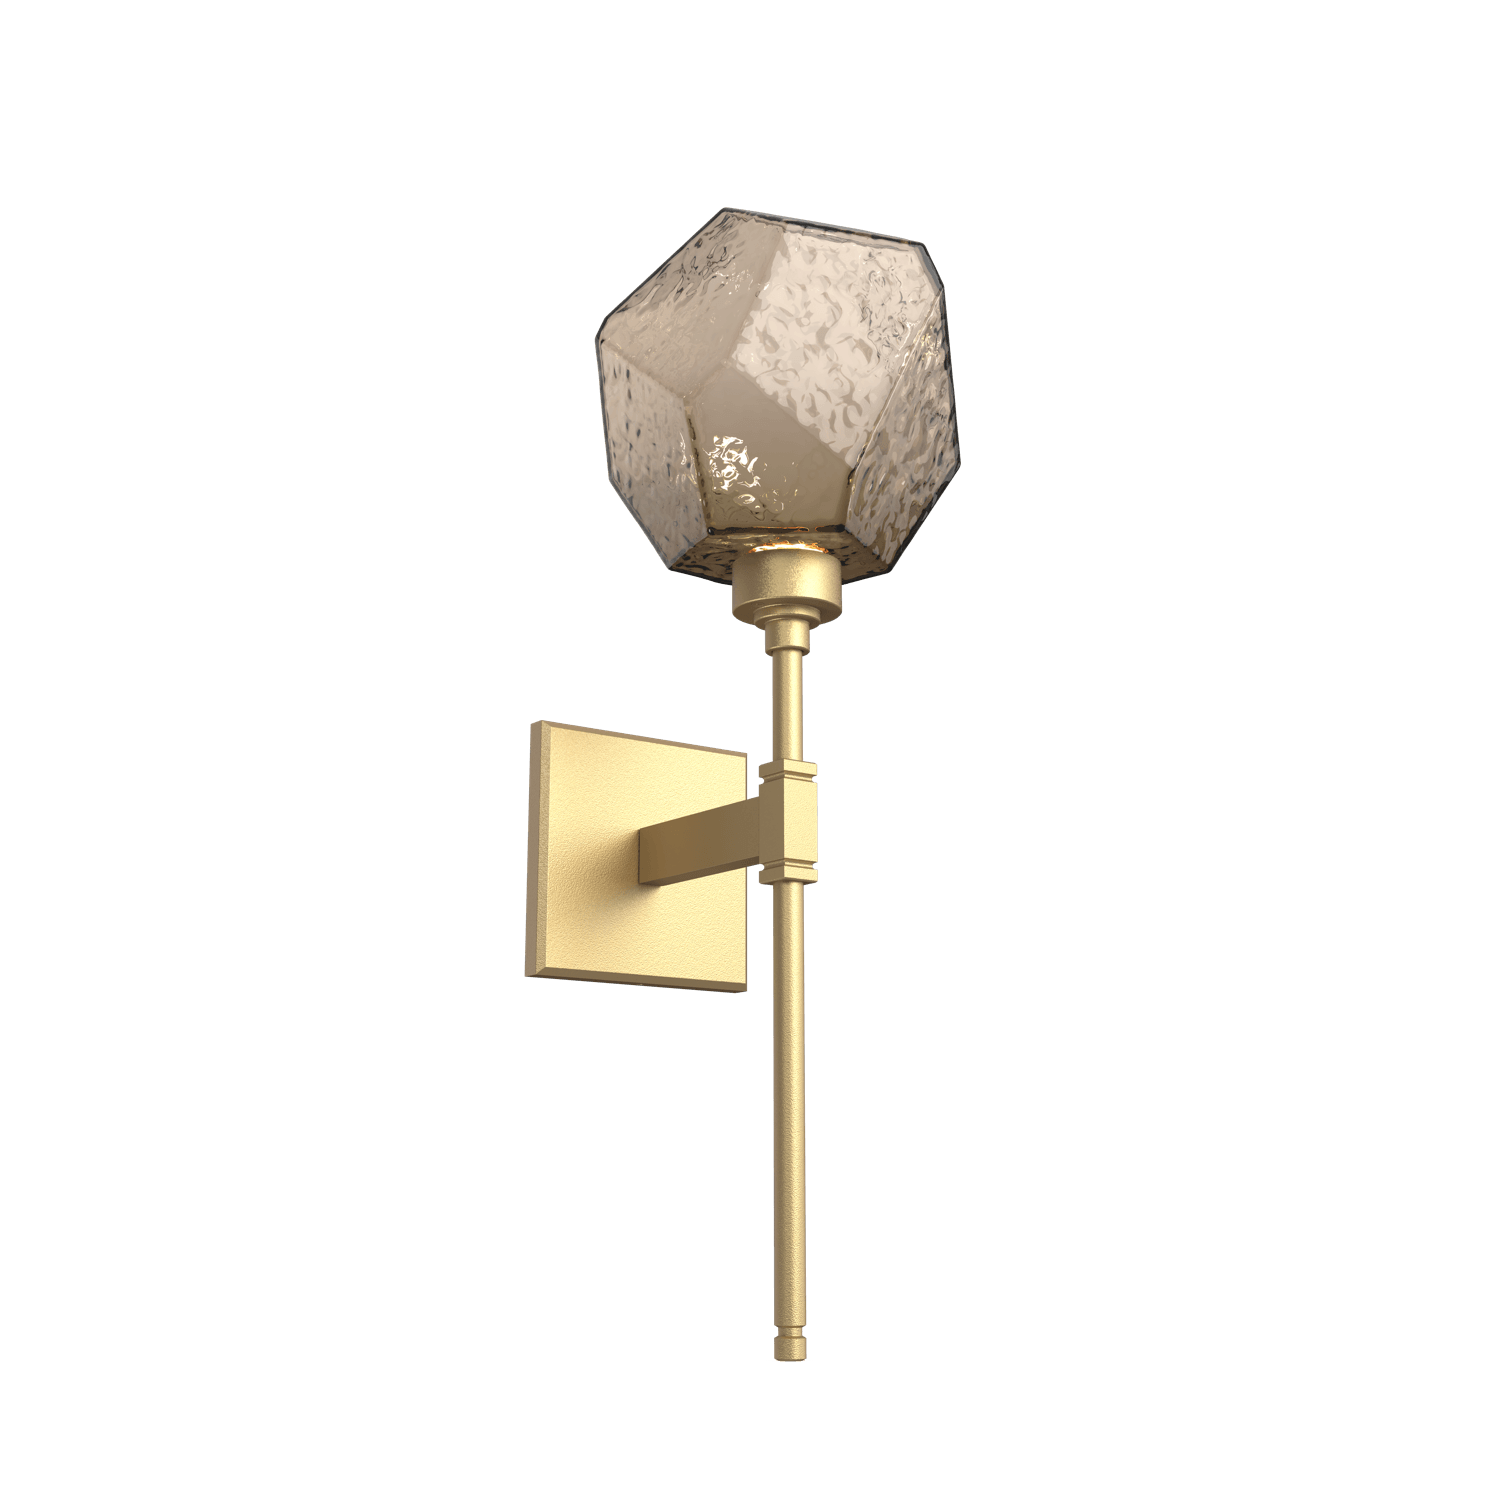 IDB0039-08-GB-B-Hammerton-Studio-Gem-belvedere-wall-sconce-with-gilded-brass-finish-and-bronze-blown-glass-shades-and-LED-lamping